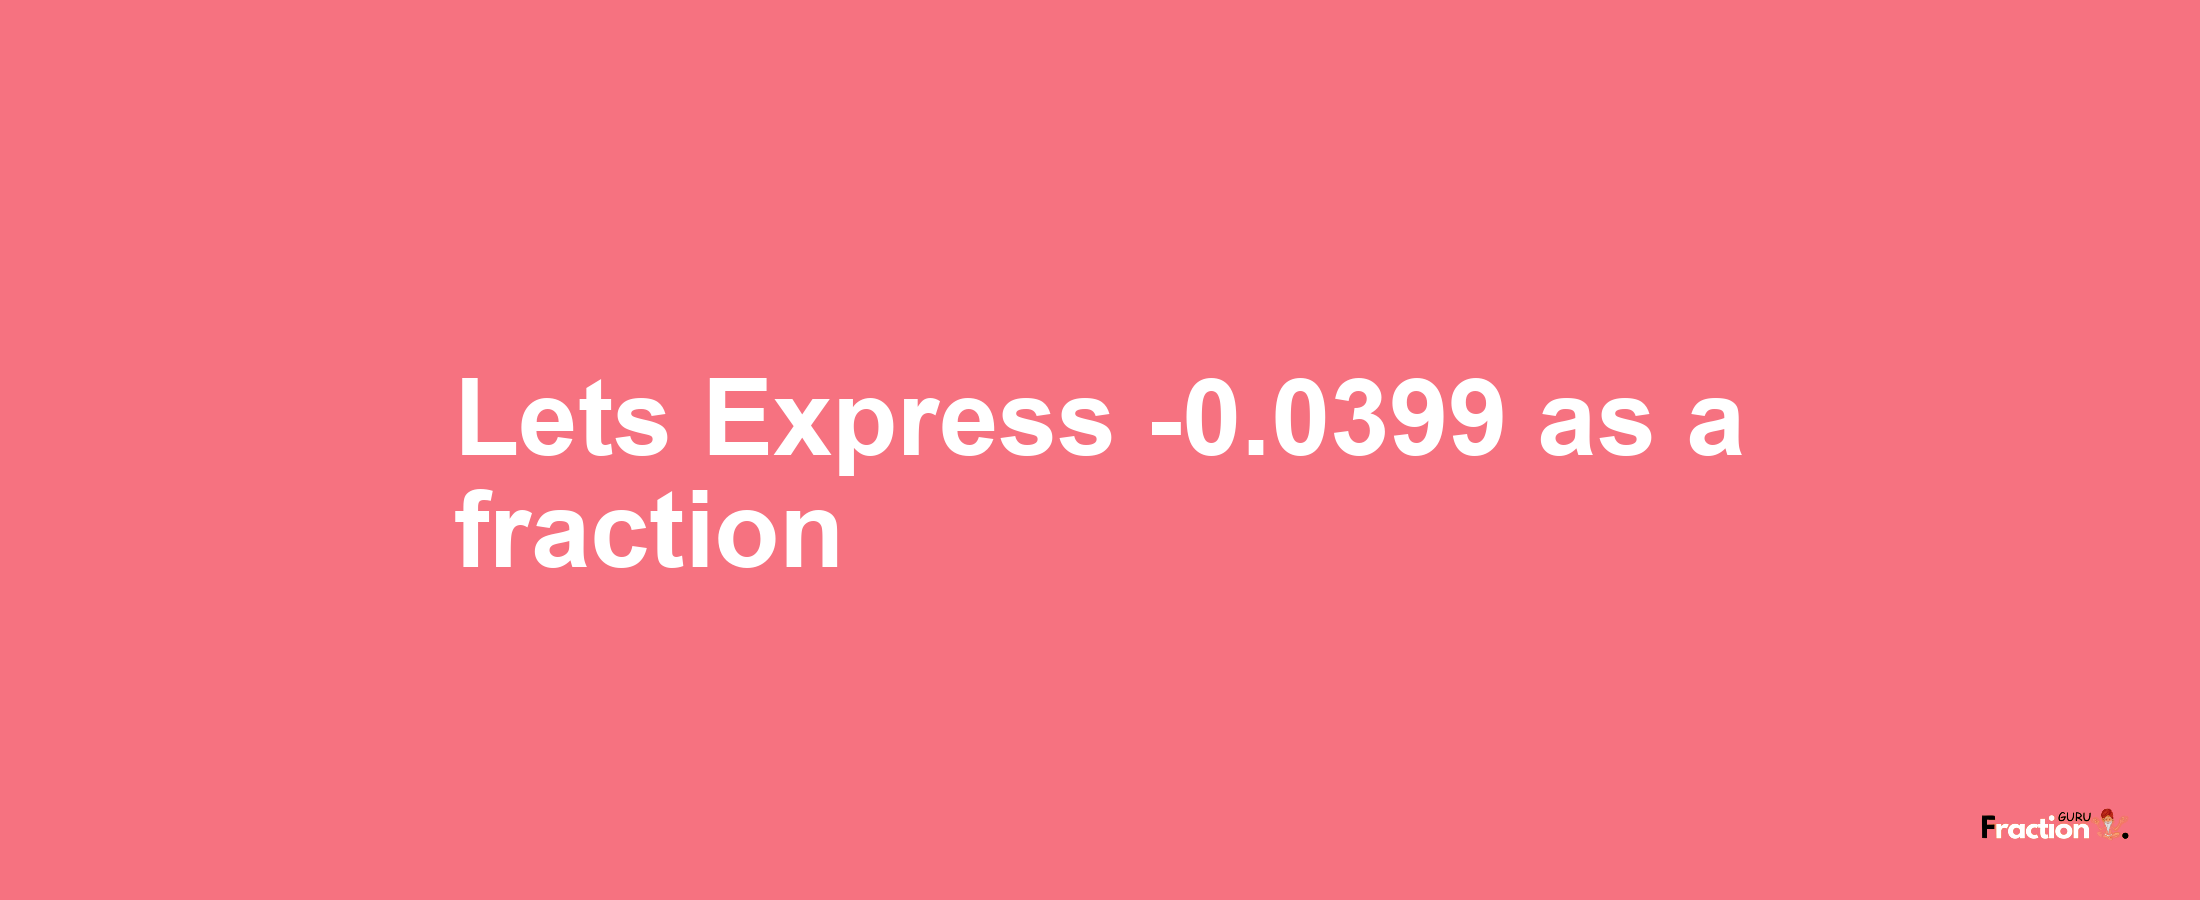 Lets Express -0.0399 as afraction